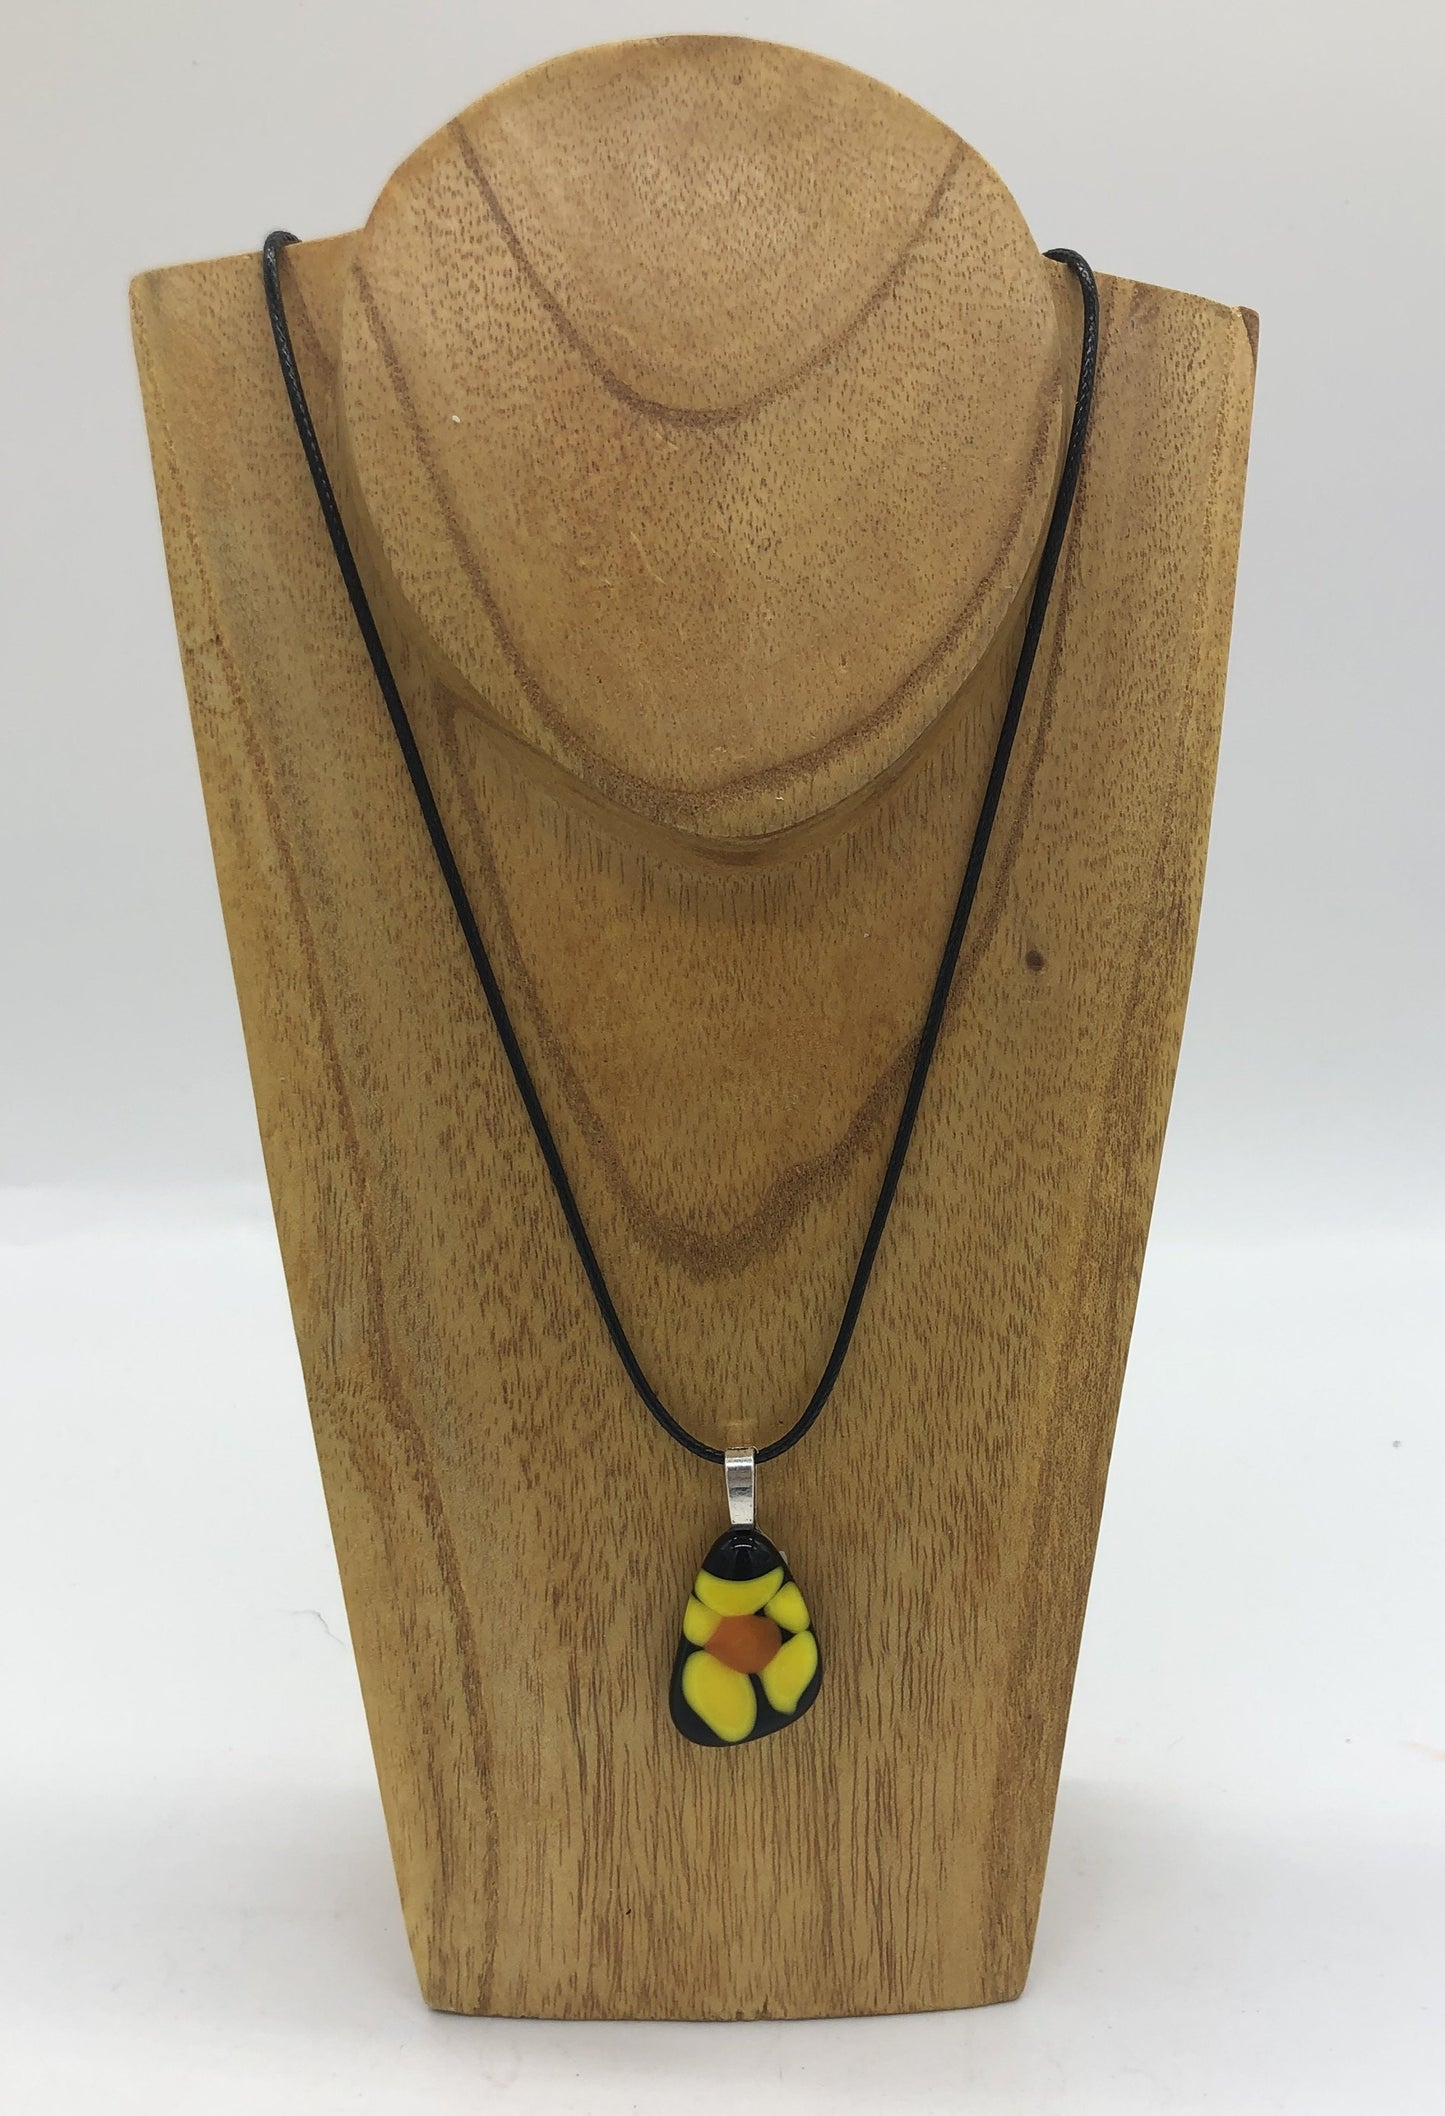 Fused glass necklace on a black cord, displaced on wooden holder.  Necklace design is a black oval with yellow petaled flower with orange center.